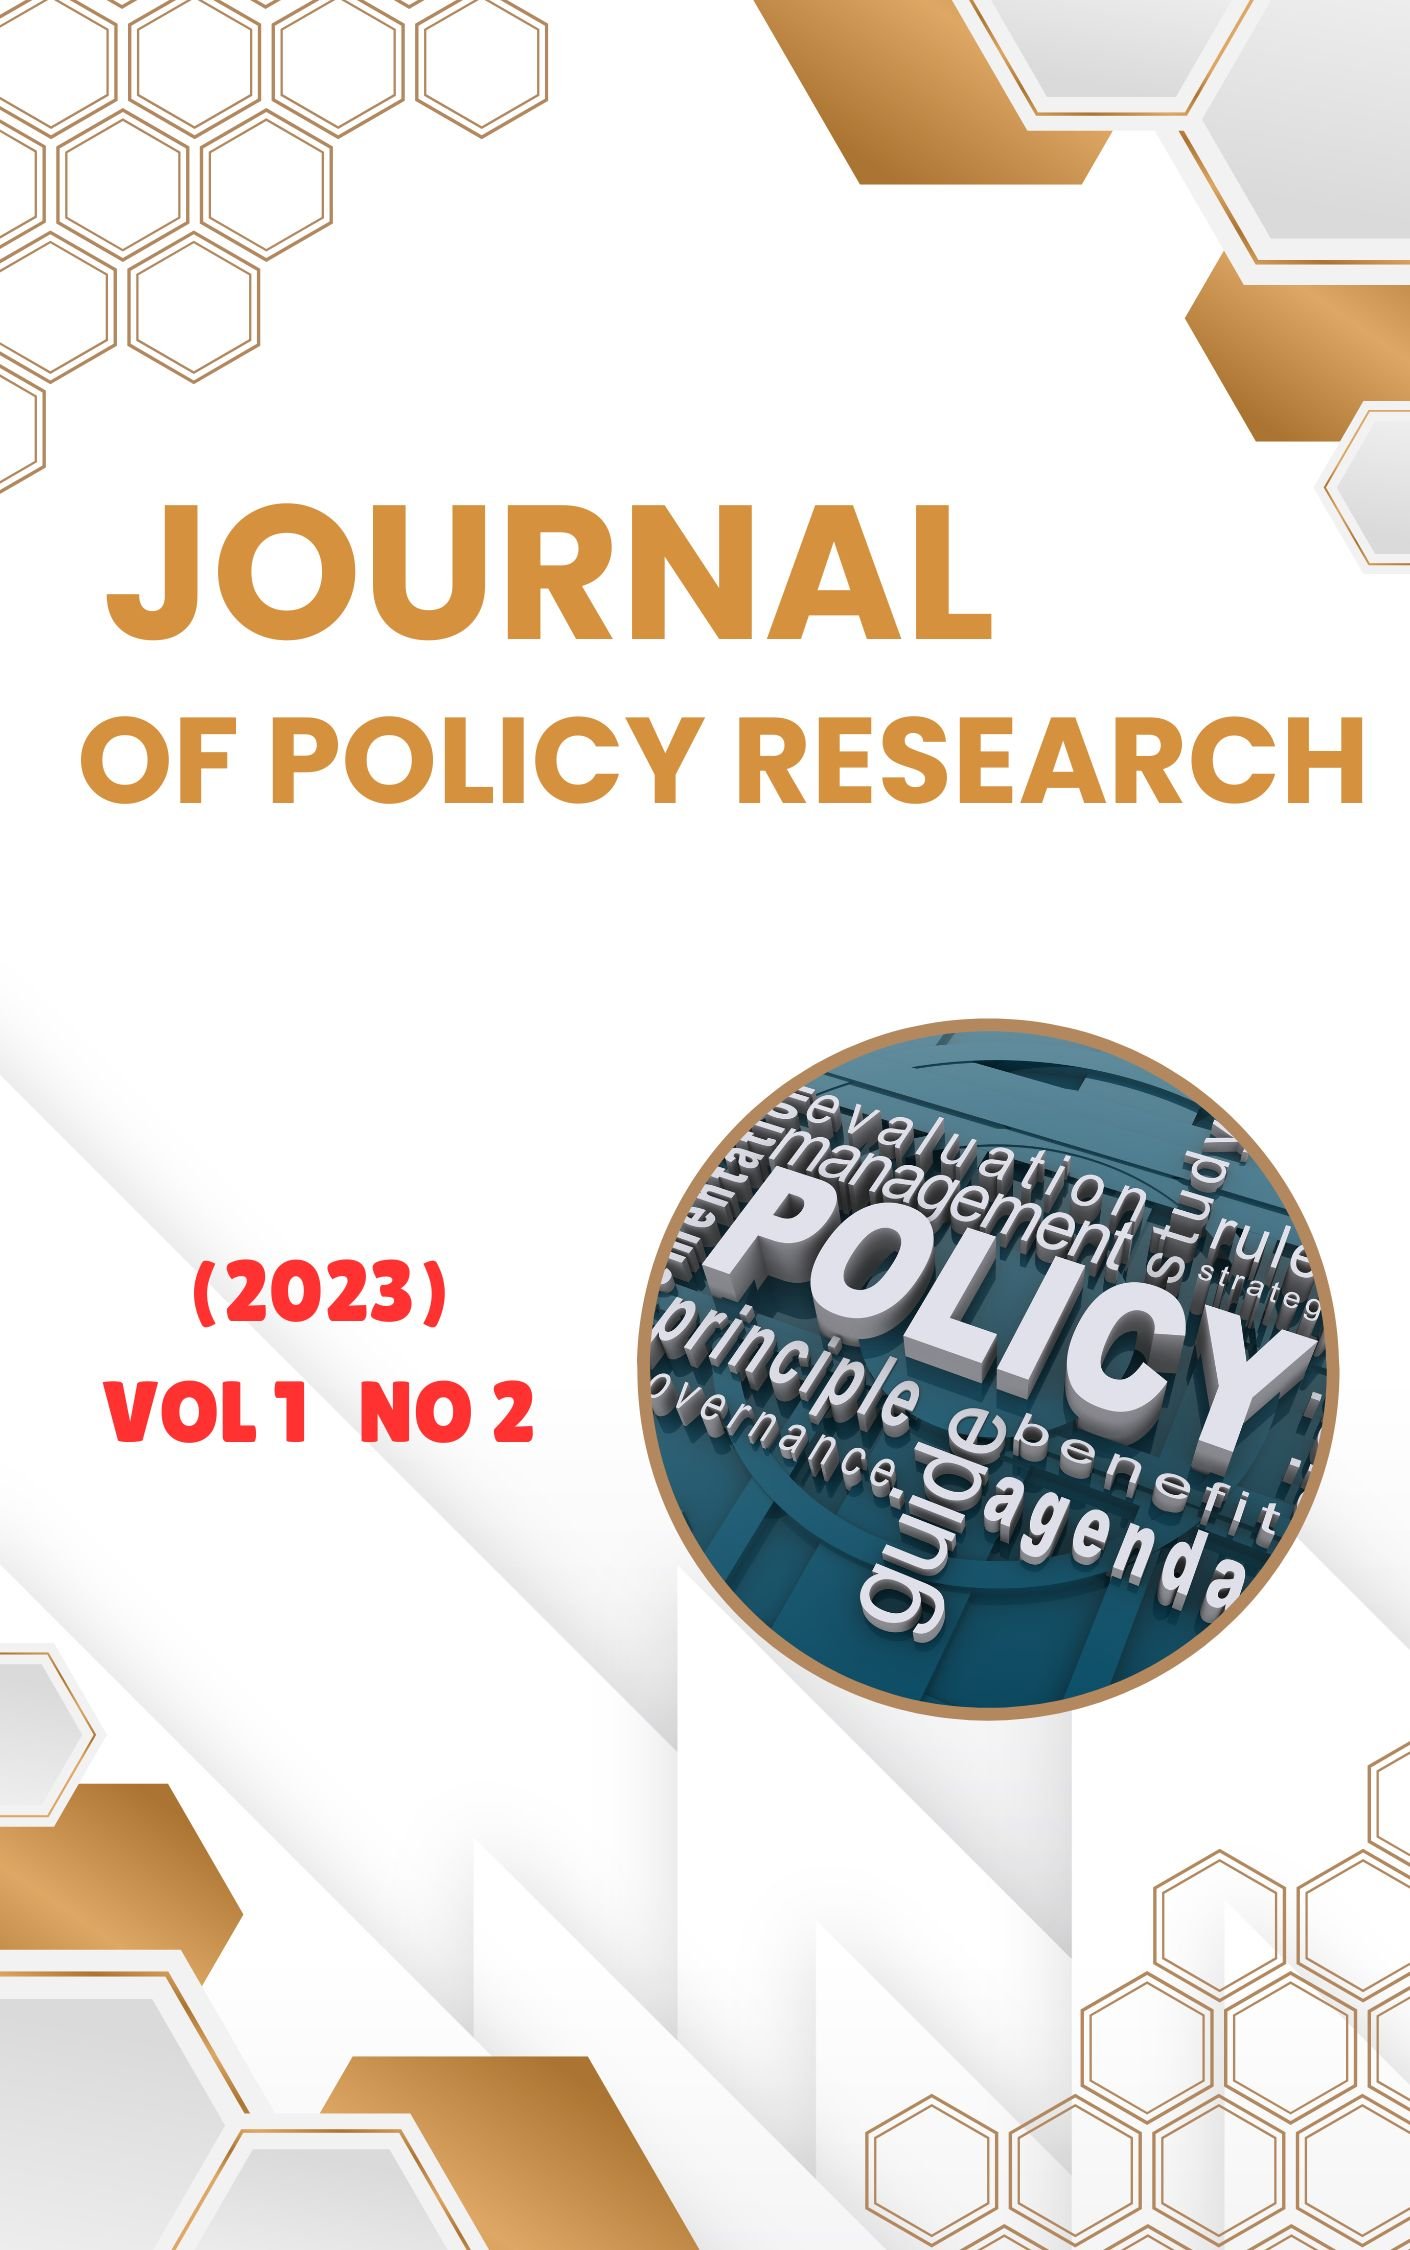 					View Vol. 1 No. 2 (2023): Policy Research Journal
				